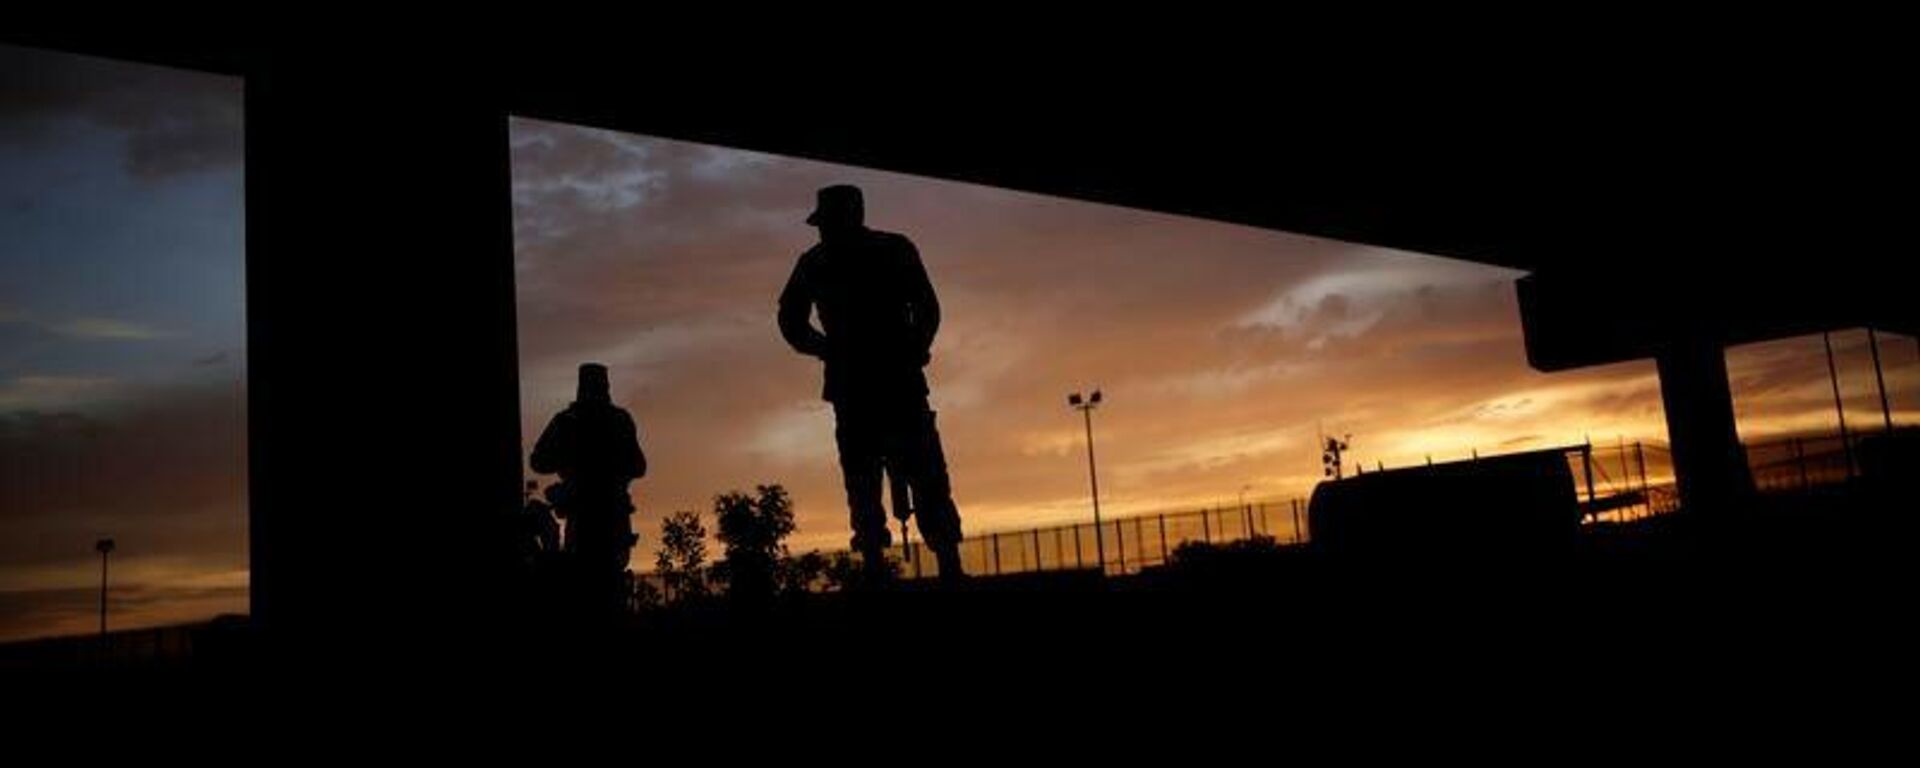 Members of the Mexican National Guard stand near the border fence between Mexico and the U.S. in Ciudad Juarez, Mexico July 6, 2019. REUTERS - Sputnik International, 1920, 29.10.2021